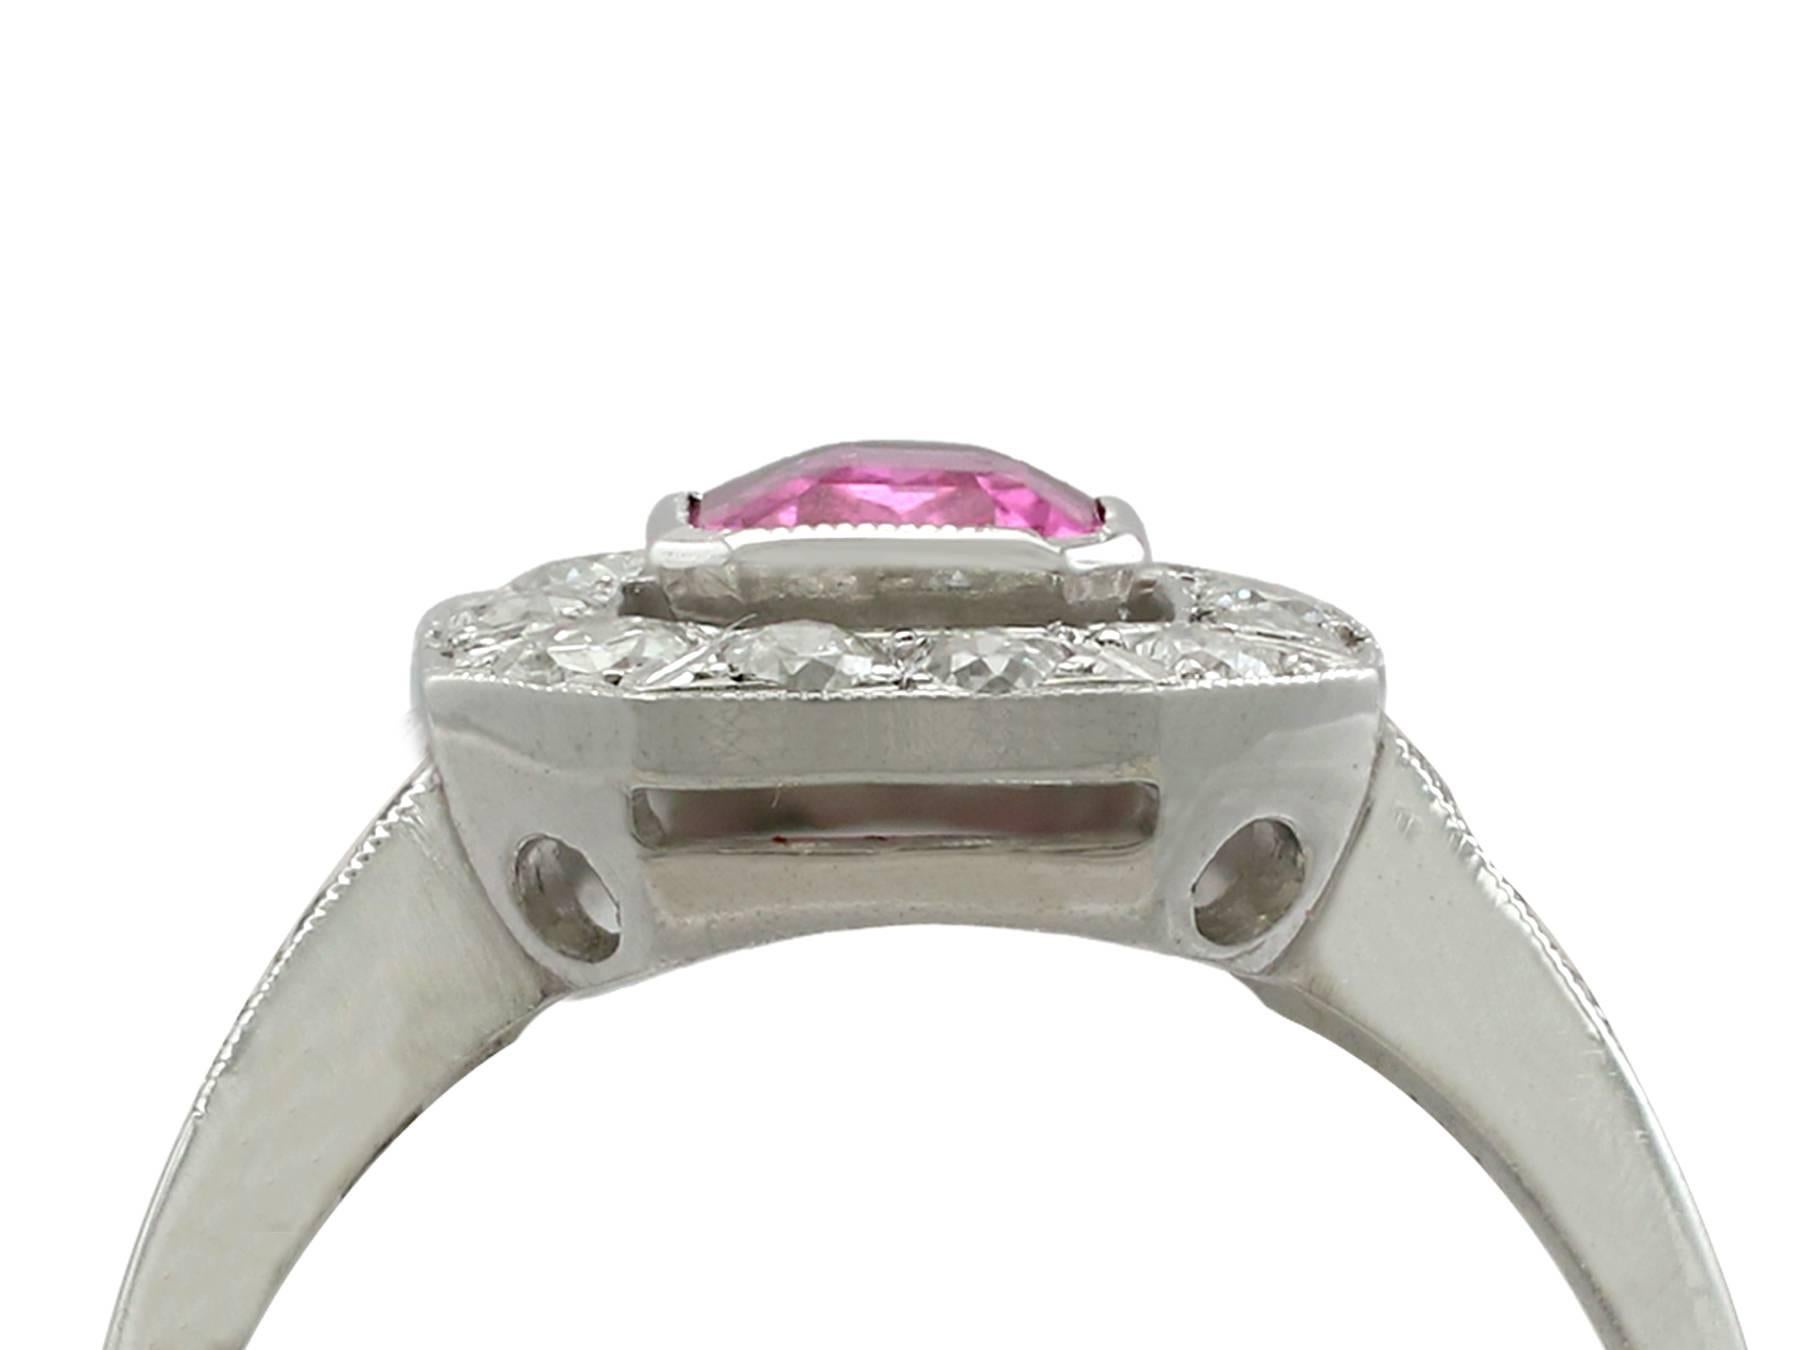 A fine and impressive 1.11 carat pink sapphire, 0.54 carat diamond and platinum cocktail ring; part of our diverse antique jewelry and estate jewelry collections.

This fine and impressive pink sapphire cocktail ring has been crafted in